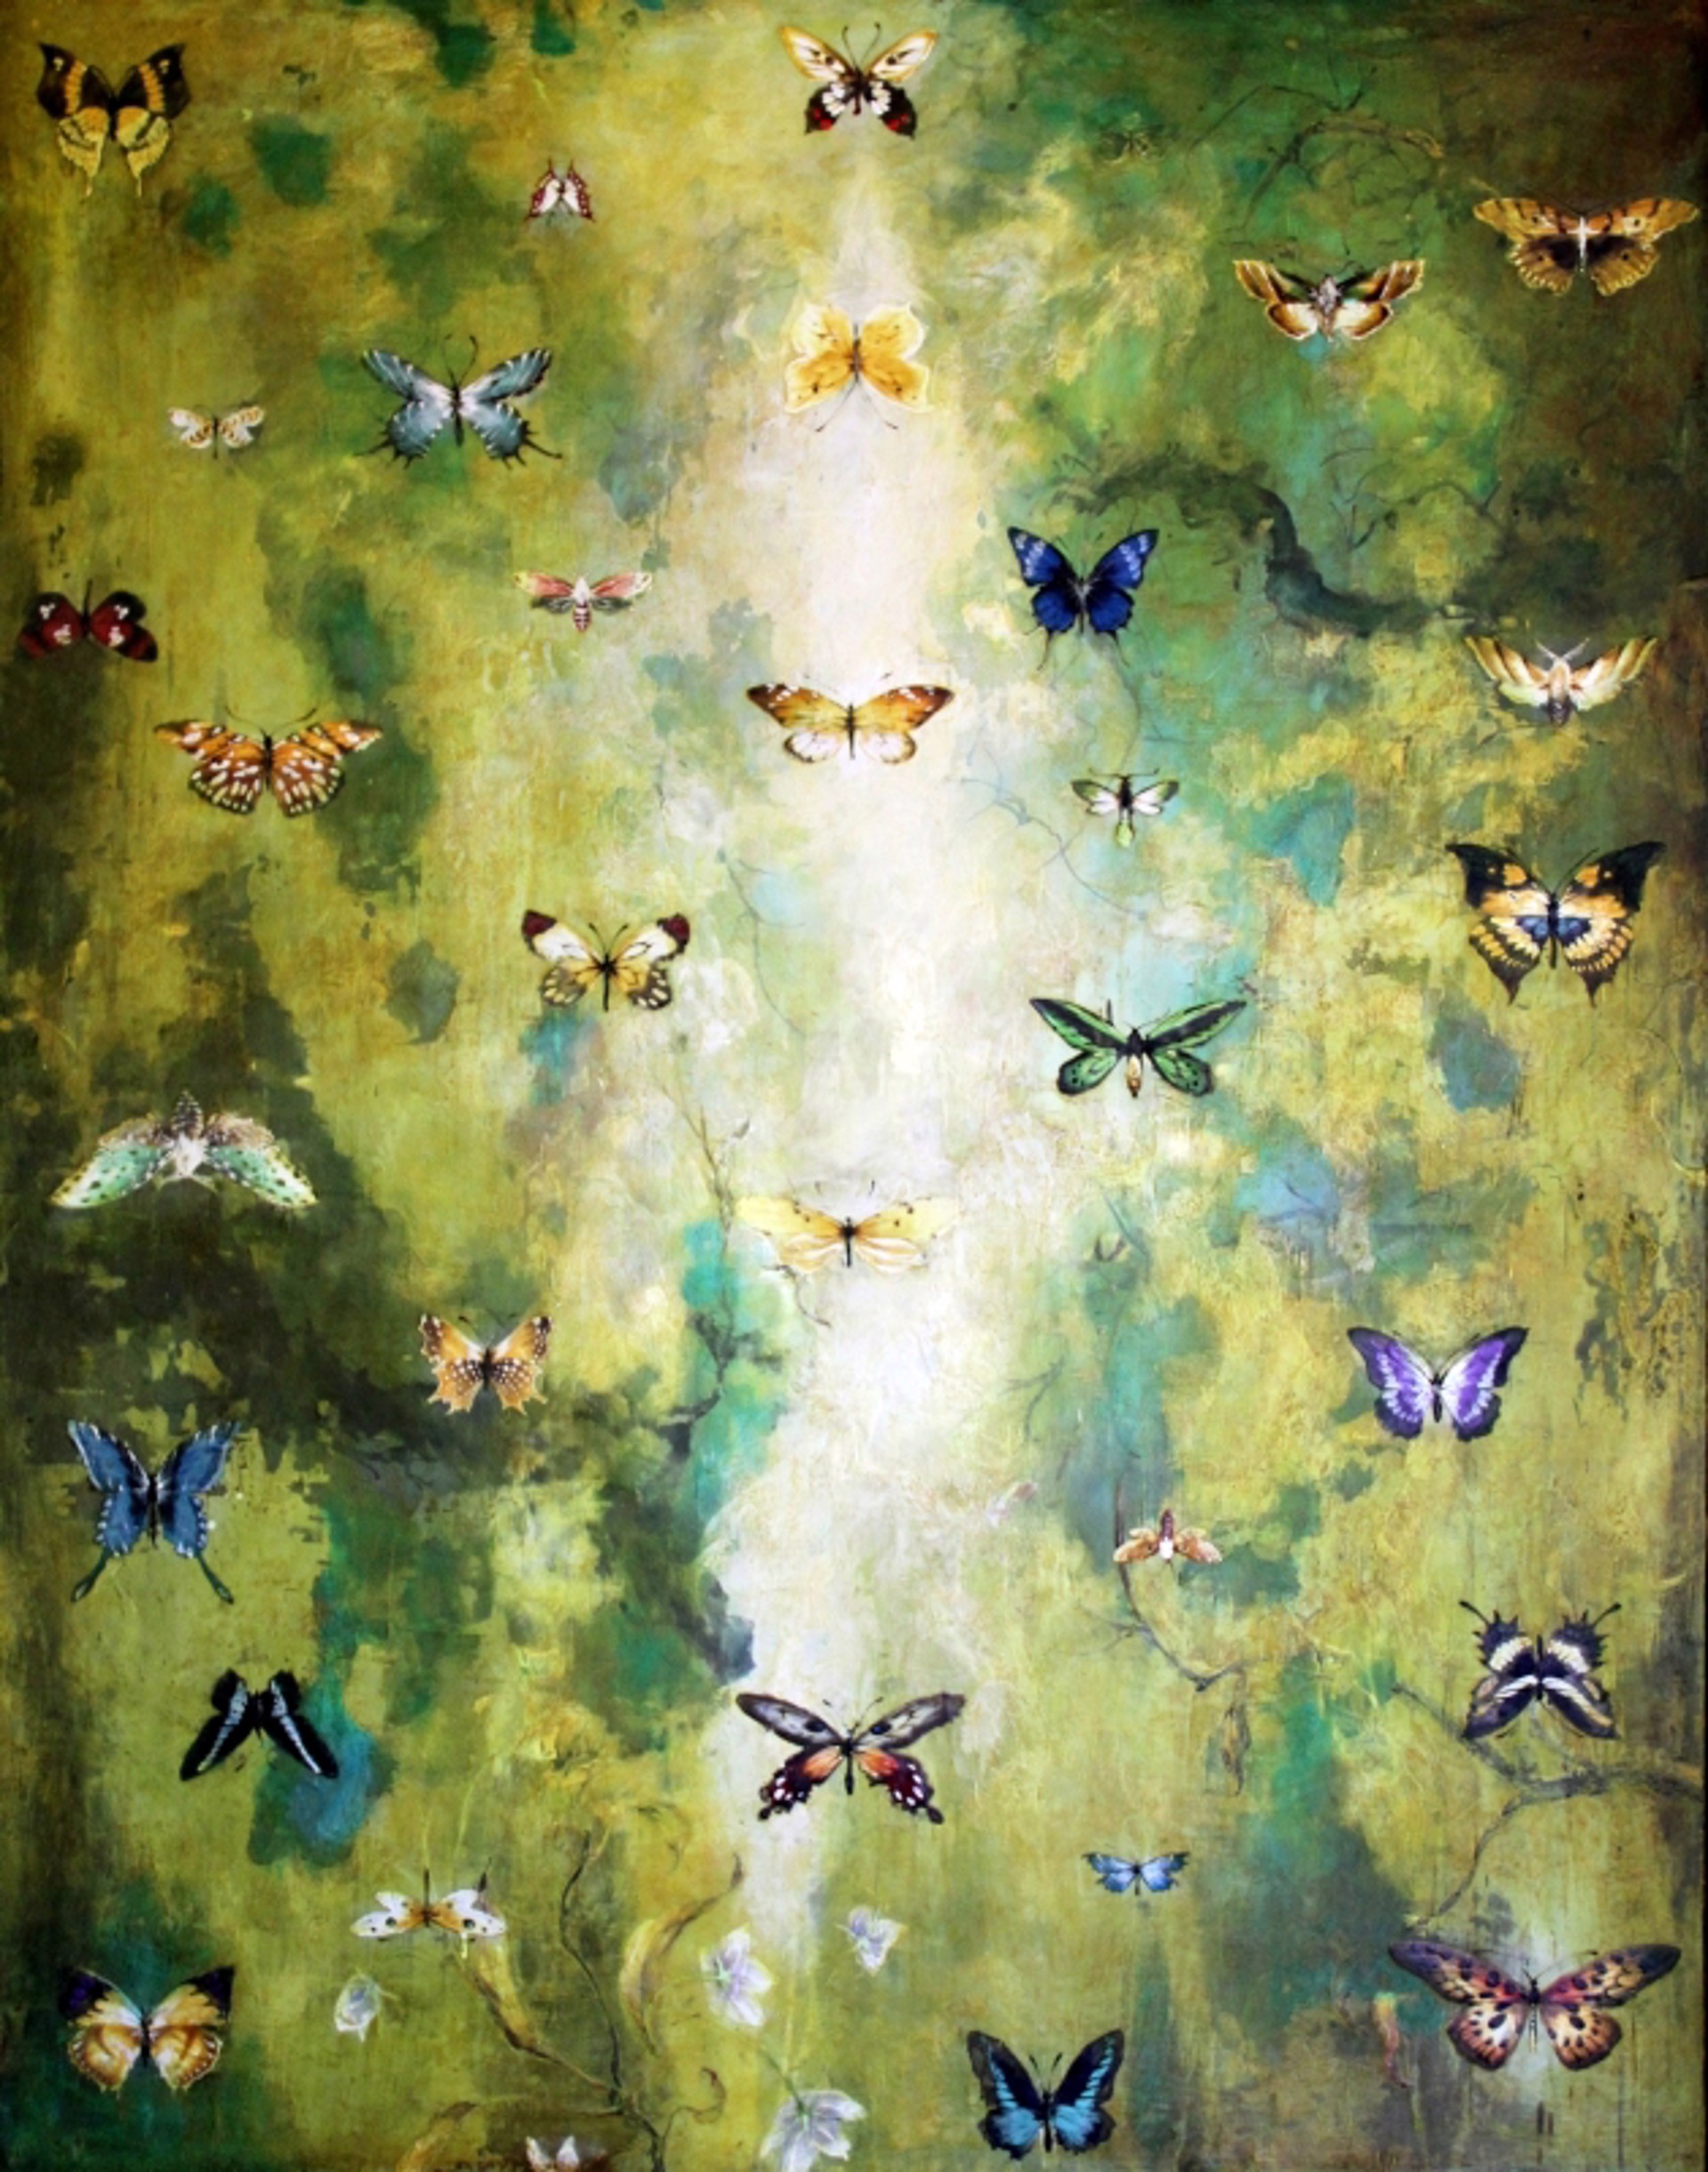 The Butterfly Sutra by Chris Reilly